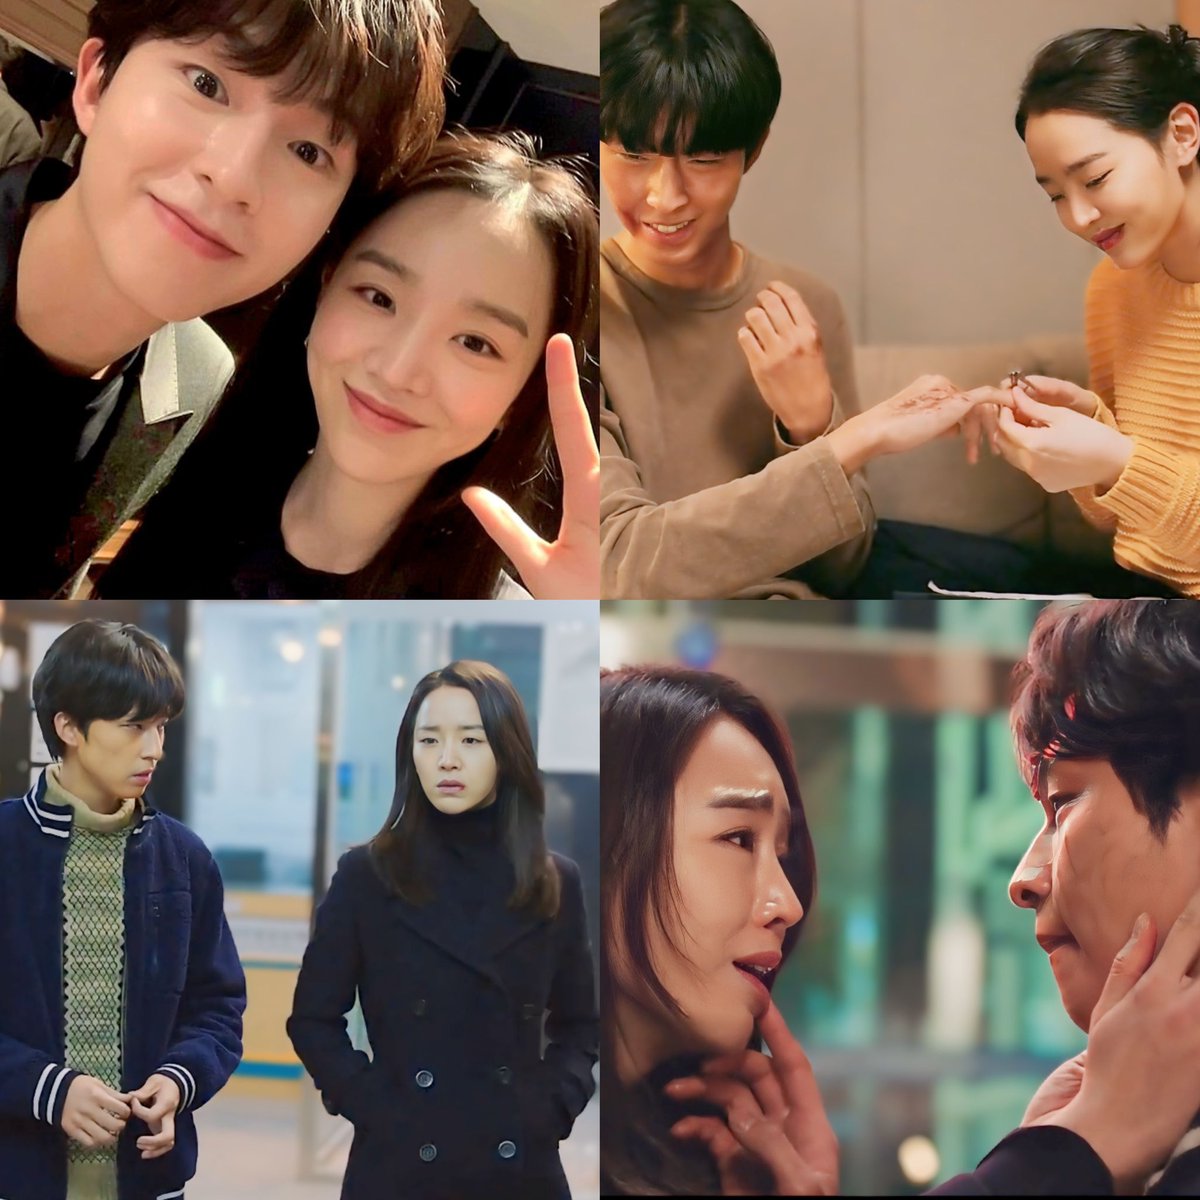 was rewatching “innocence” and I need these two to reunite as siblings again in a happy storyline this time please 🥺

#신혜선 #ShinHaeSun #ShinHyeSun #HongKyung